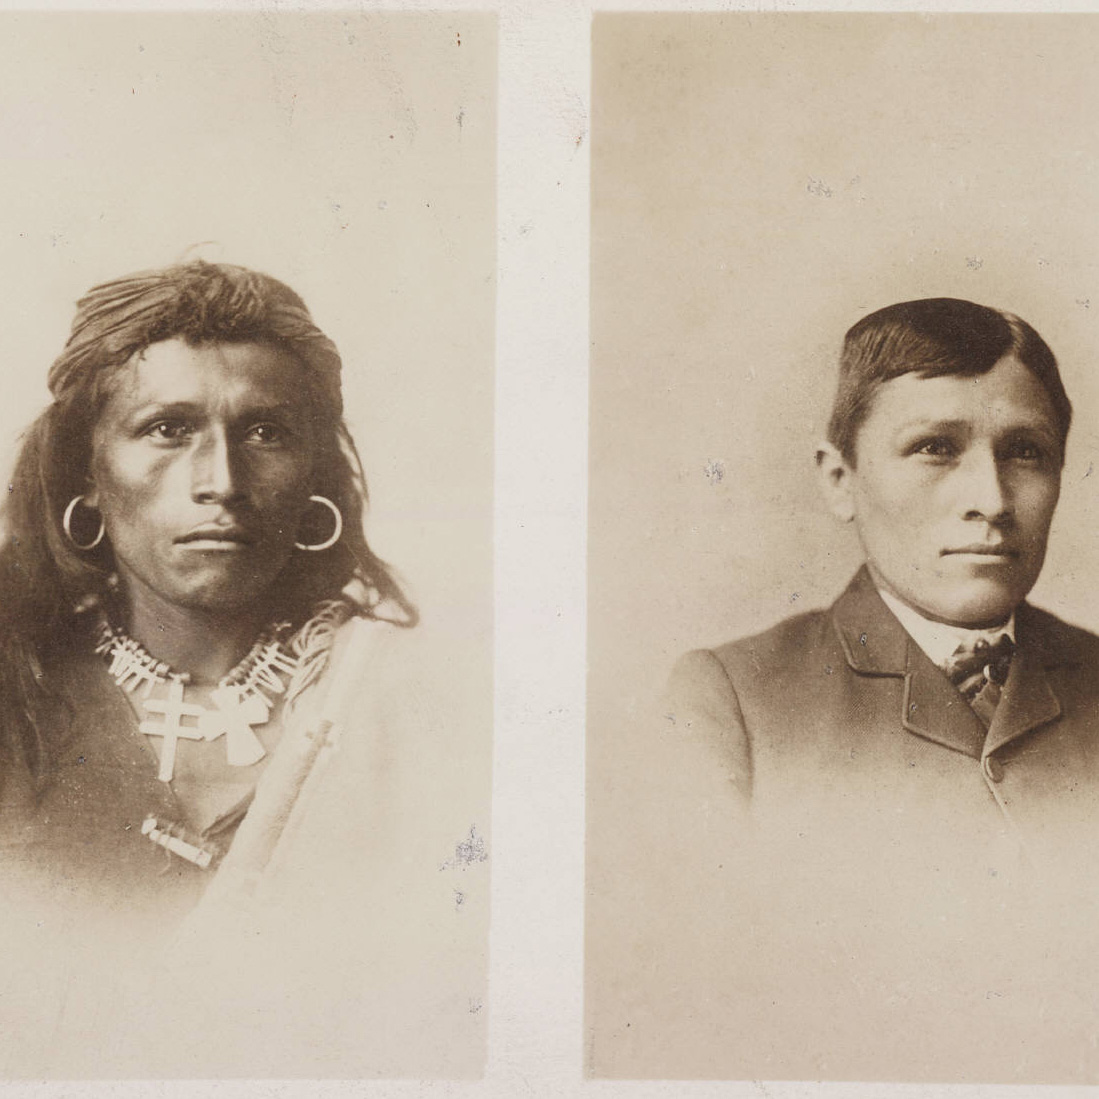 Two photos of TOm Torlino one in traditonal American Indian dress with long hair, the second in an American suit with a short cropped haircut